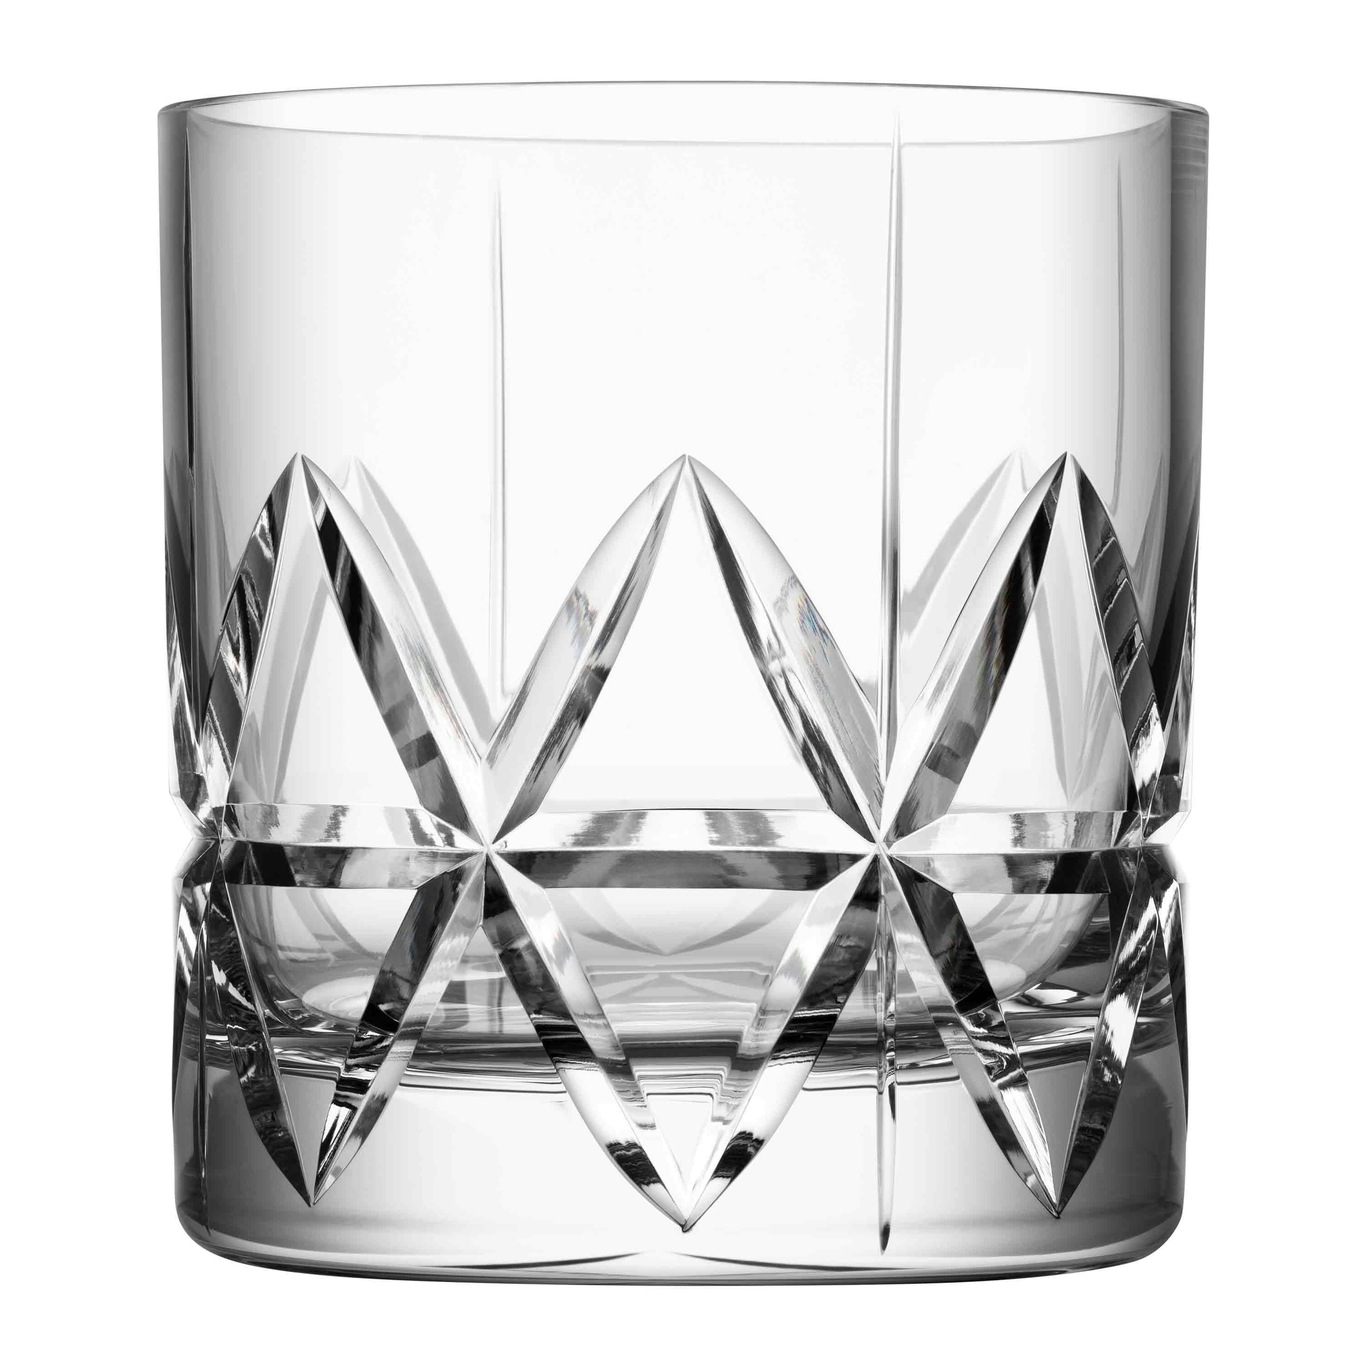 https://royaldesign.com/image/2/orrefors-peak-double-old-fashioned-whiskey-glass-34-cl-4-pack-0?w=800&quality=80